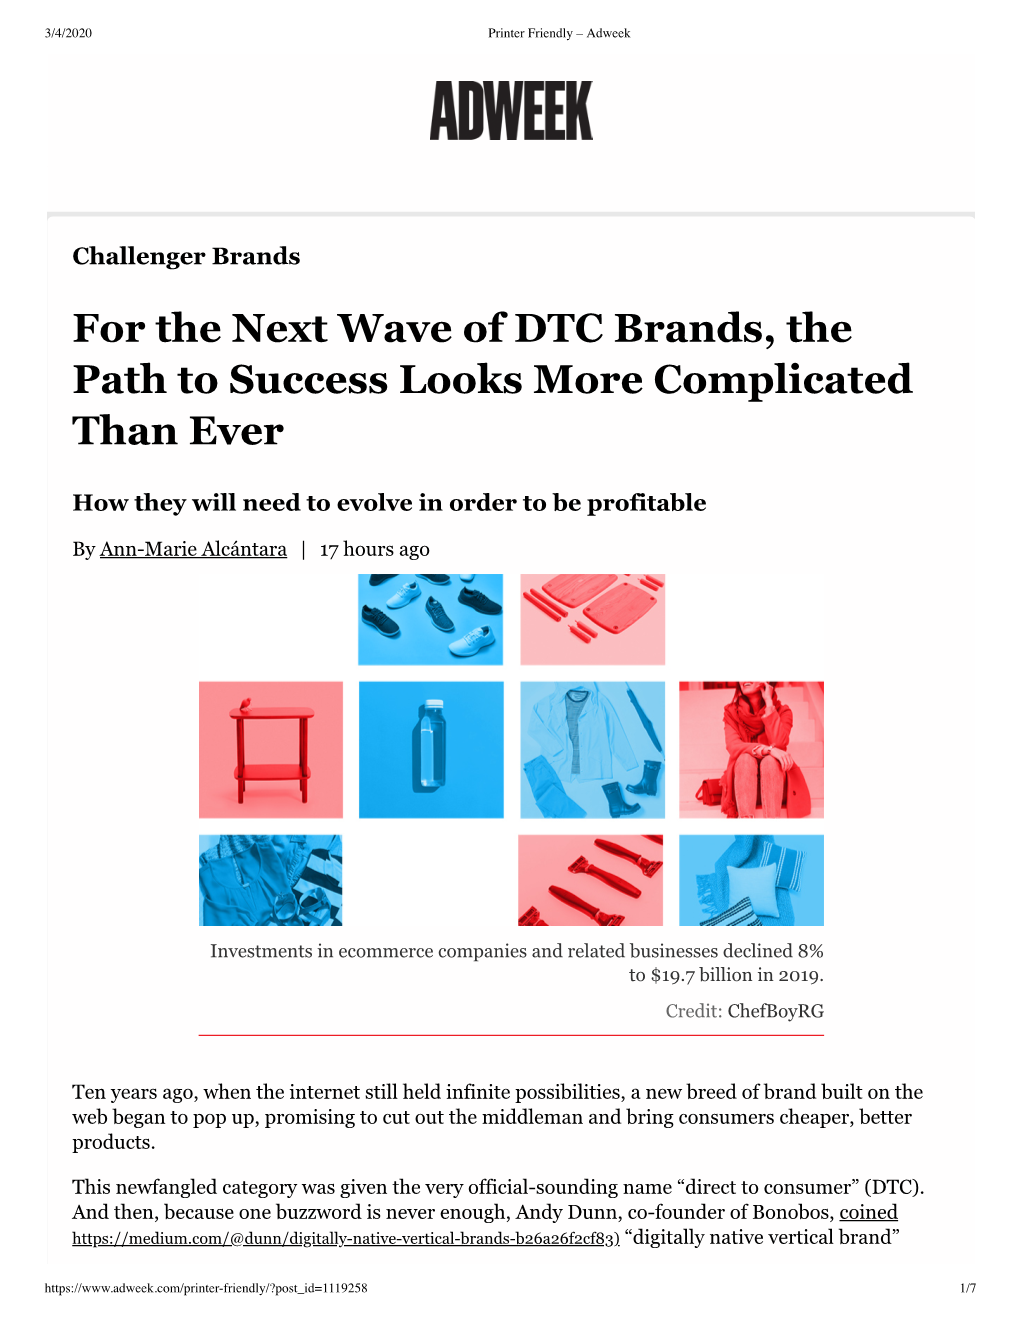 For the Next Wave of DTC Brands, the Path to Success Looks More Complicated Than Ever